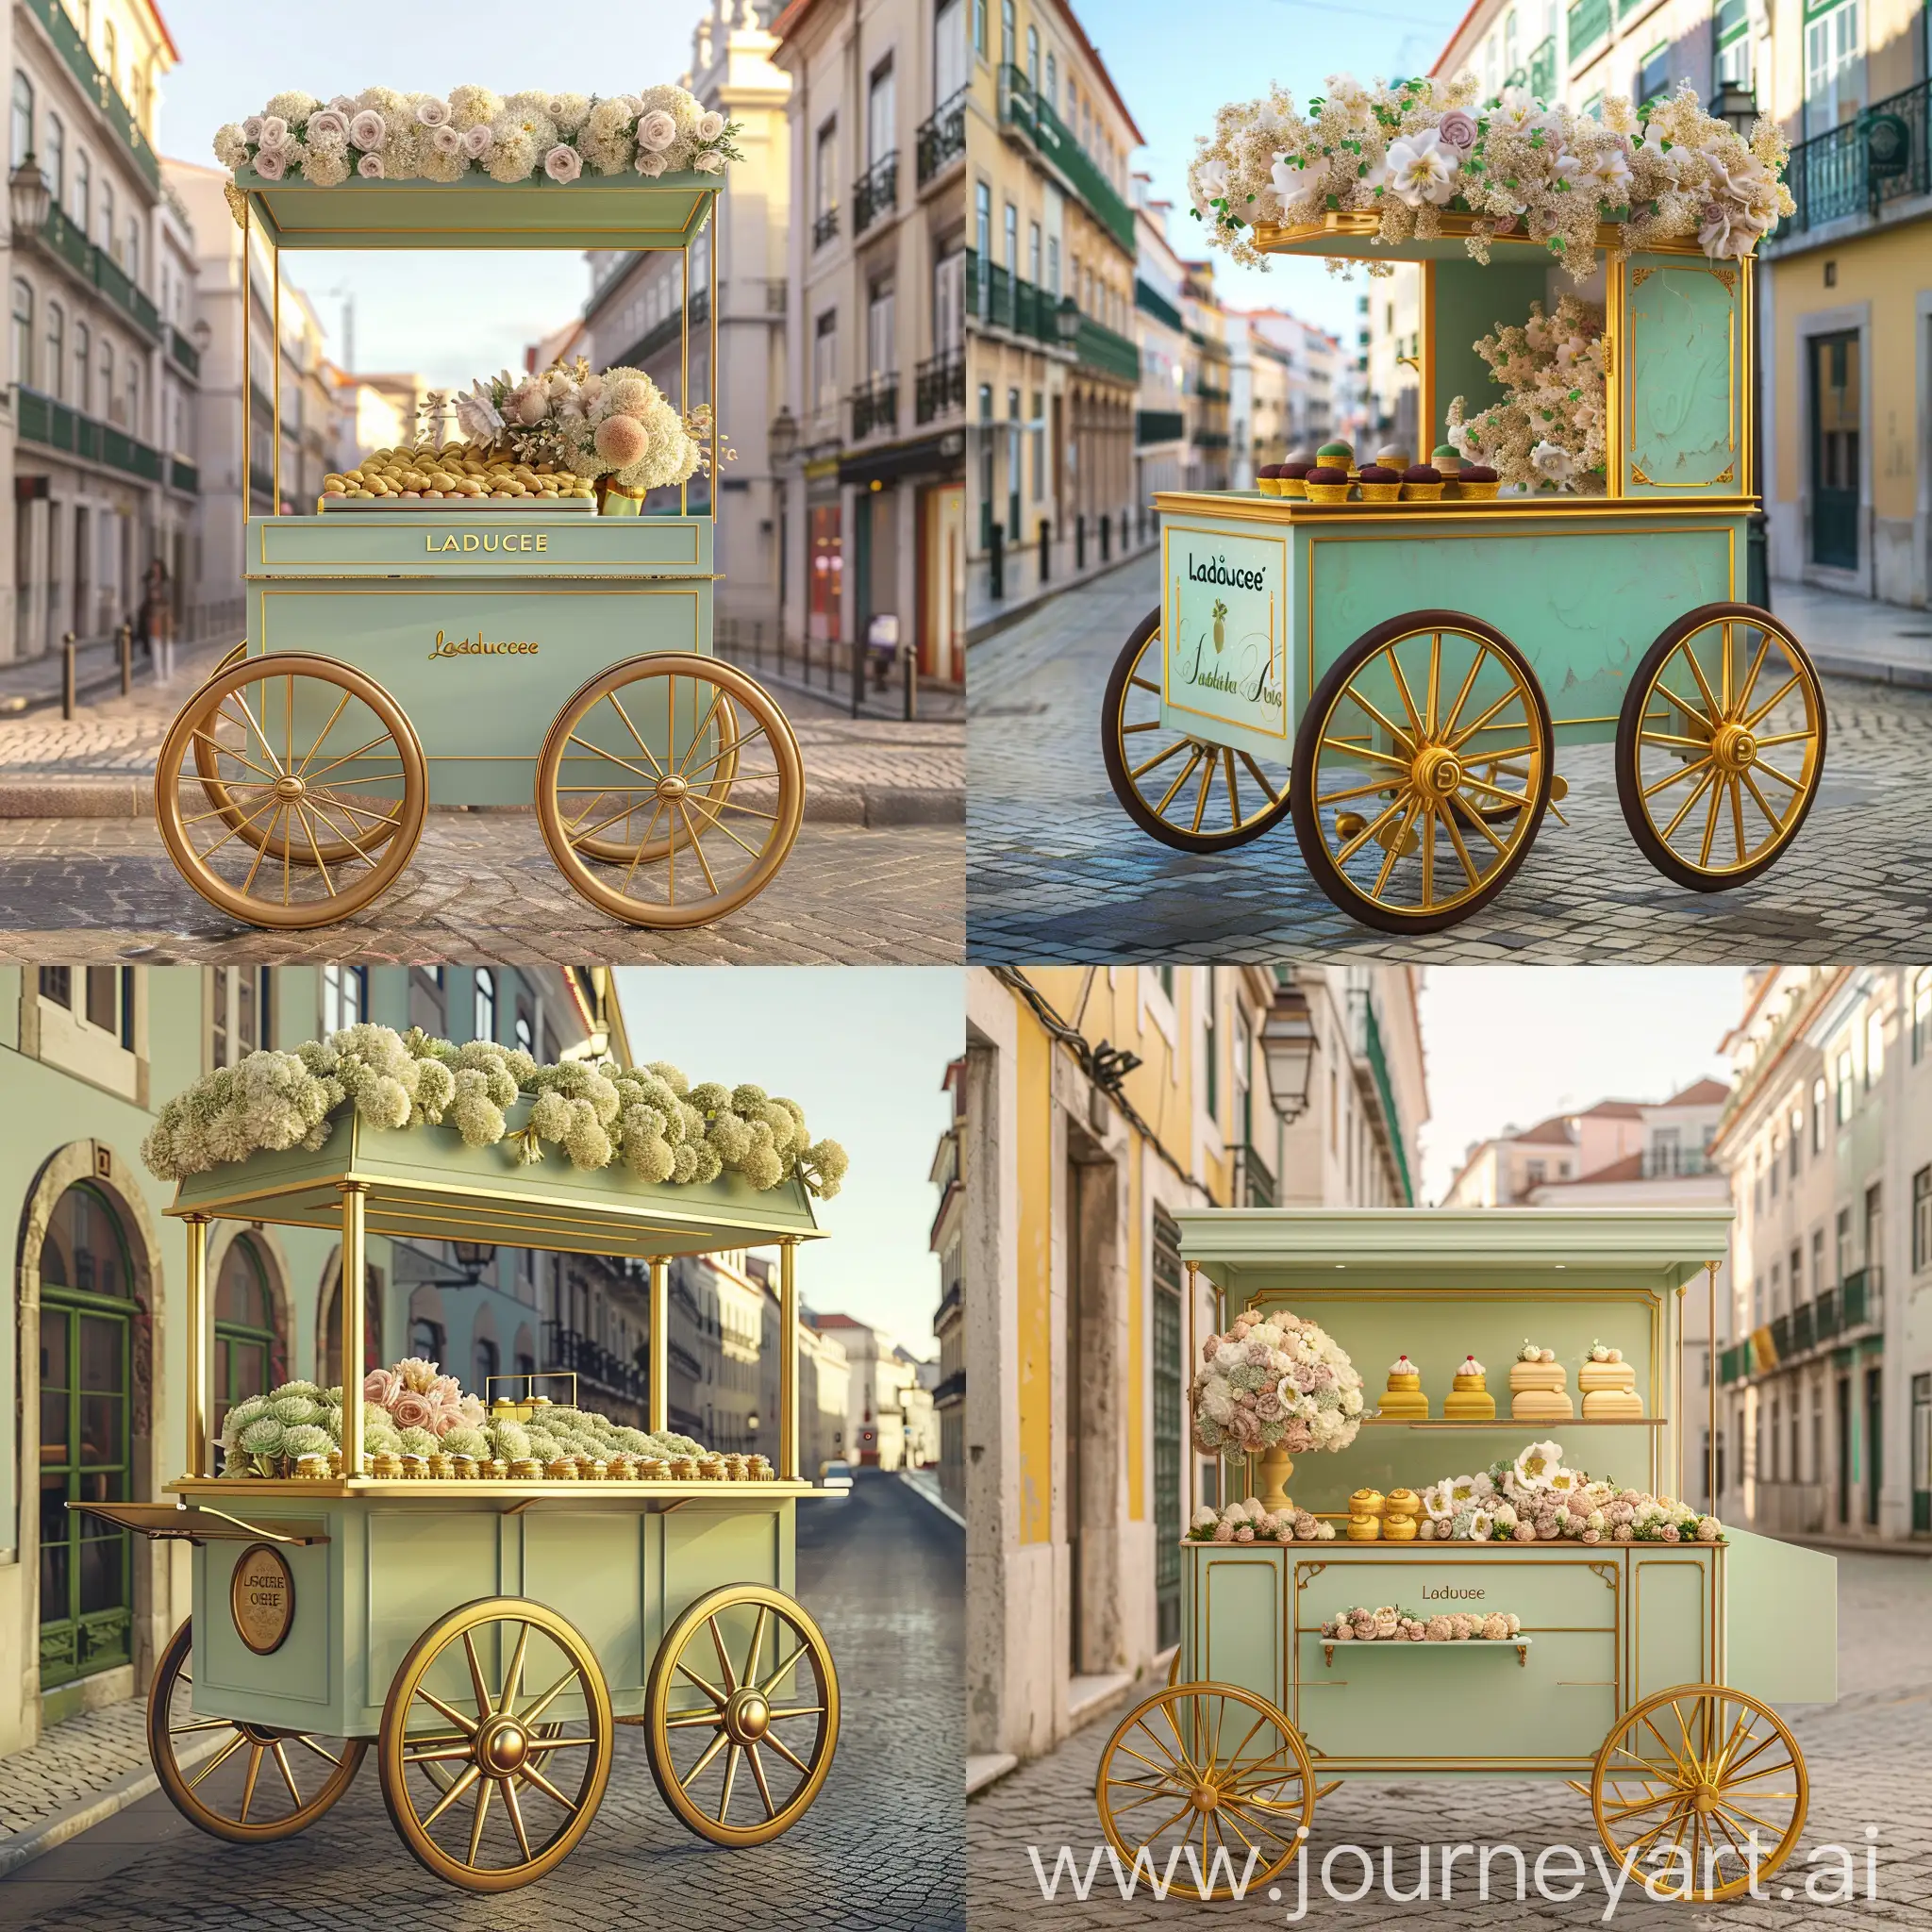 Ladure-ParisInspired-Cart-with-Flower-Display-in-Pistachio-and-Gold-Colors